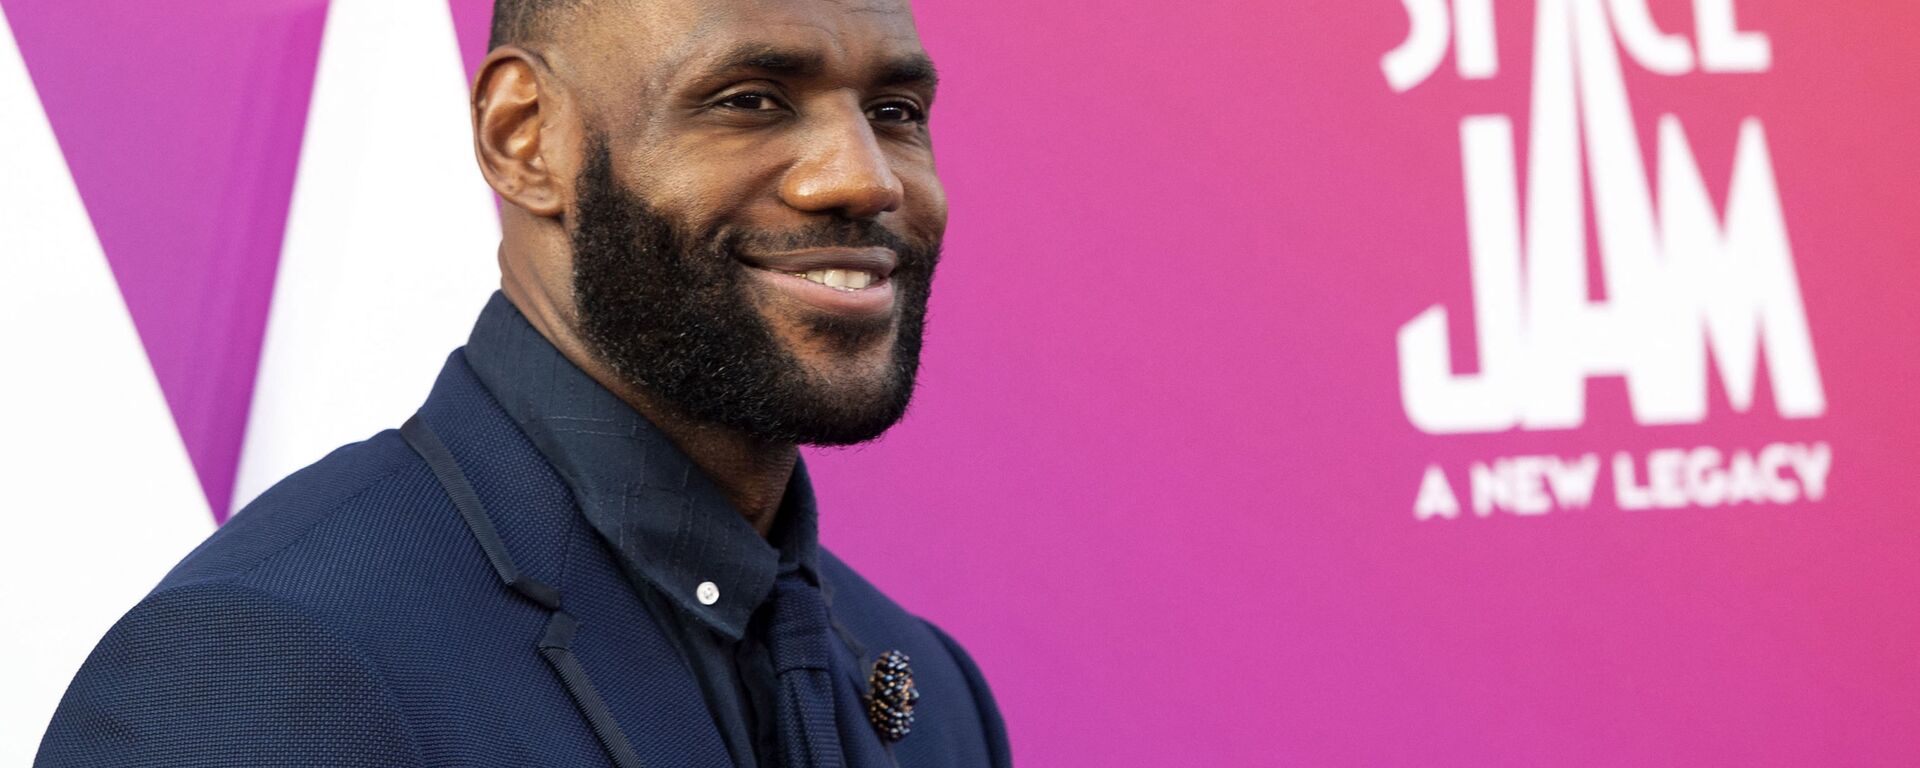 In this file photo basketball player/actor LeBron James arrives at the Warner Bros Pictures world premiere of Space Jam: A New Legacy at the Regal LA Live in Los Angeles, California, July 12, 2021. - New Warner Bros. release Space Jam: A New Legacy rocketed to the top of the North American box office over the weekend, taking in an estimated $31.6 million in the best showing of a family film since Covid first hammered the industry. The live action/animated movie -- a sequel nearly 25 years after the original Space Jam with Michael Jordan -- has NBA superstar LeBron James teaming up with Bugs Bunny and other Looney Tunes characters in a high-stakes basketball game against a rogue artificial-intelligence entity threatening his son. - Sputnik International, 1920, 21.02.2022